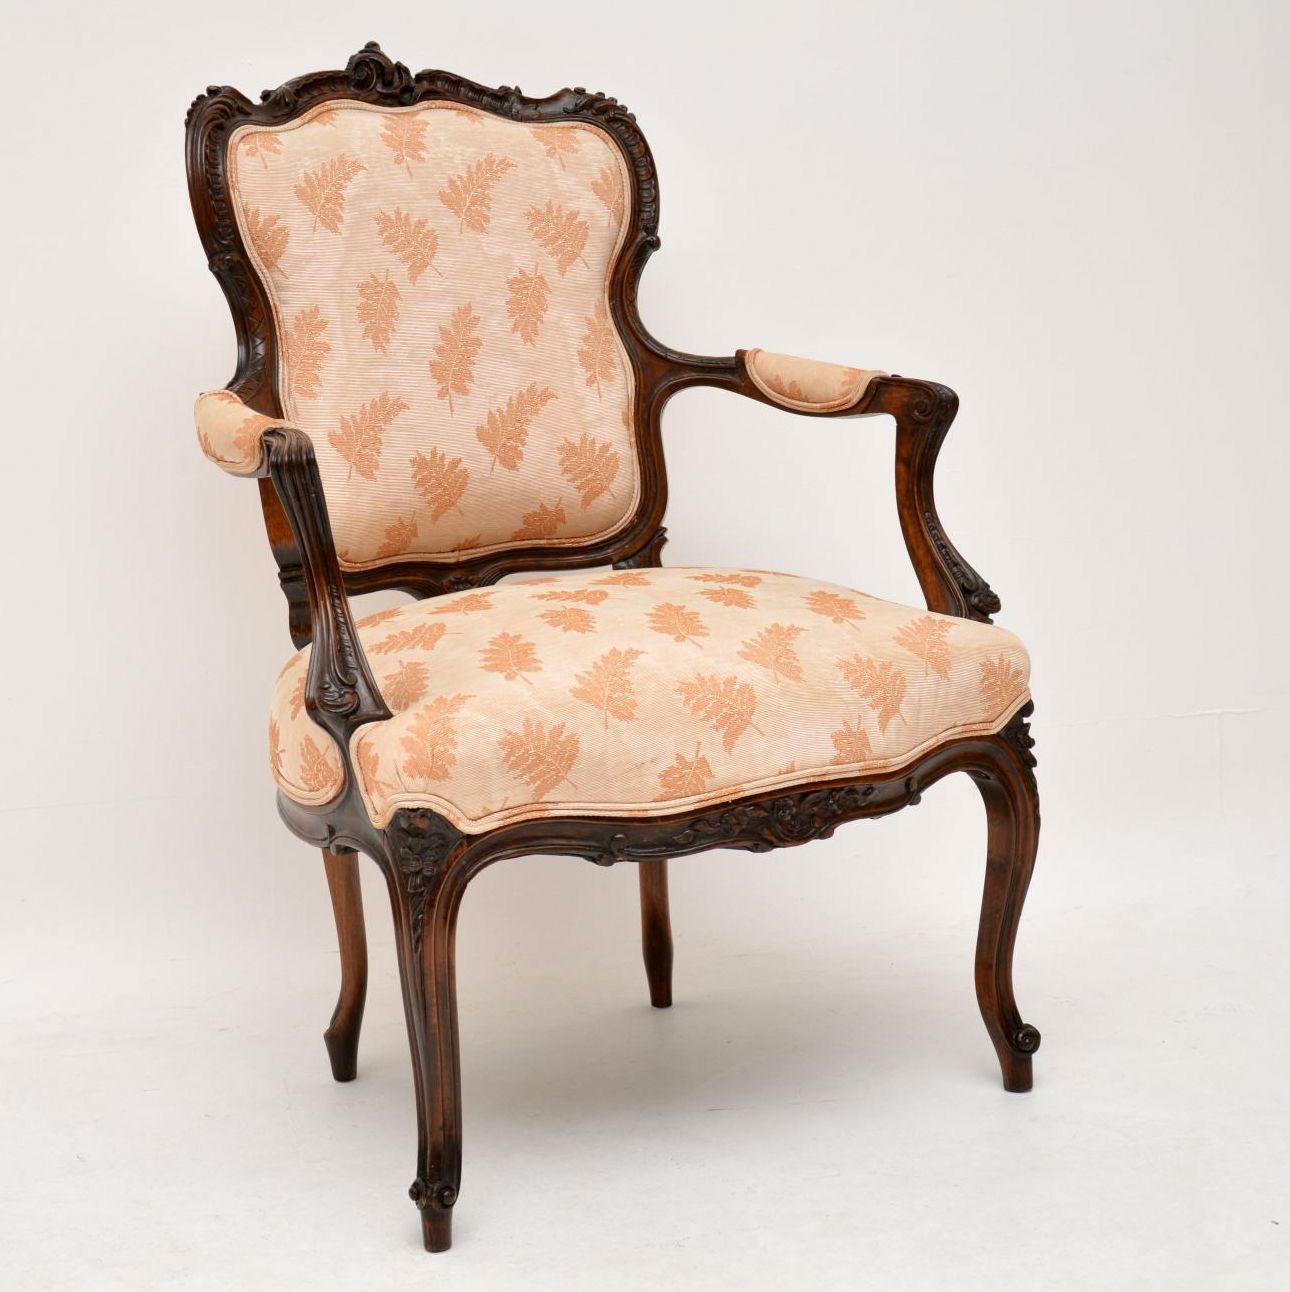 French antique walnut salon armchair in good original condition, dating roughly from the 1880s period. It’s finely carved all-over and the carving is very crisp. This chair is structurally sound & the upholstery is still in good condition. It has a